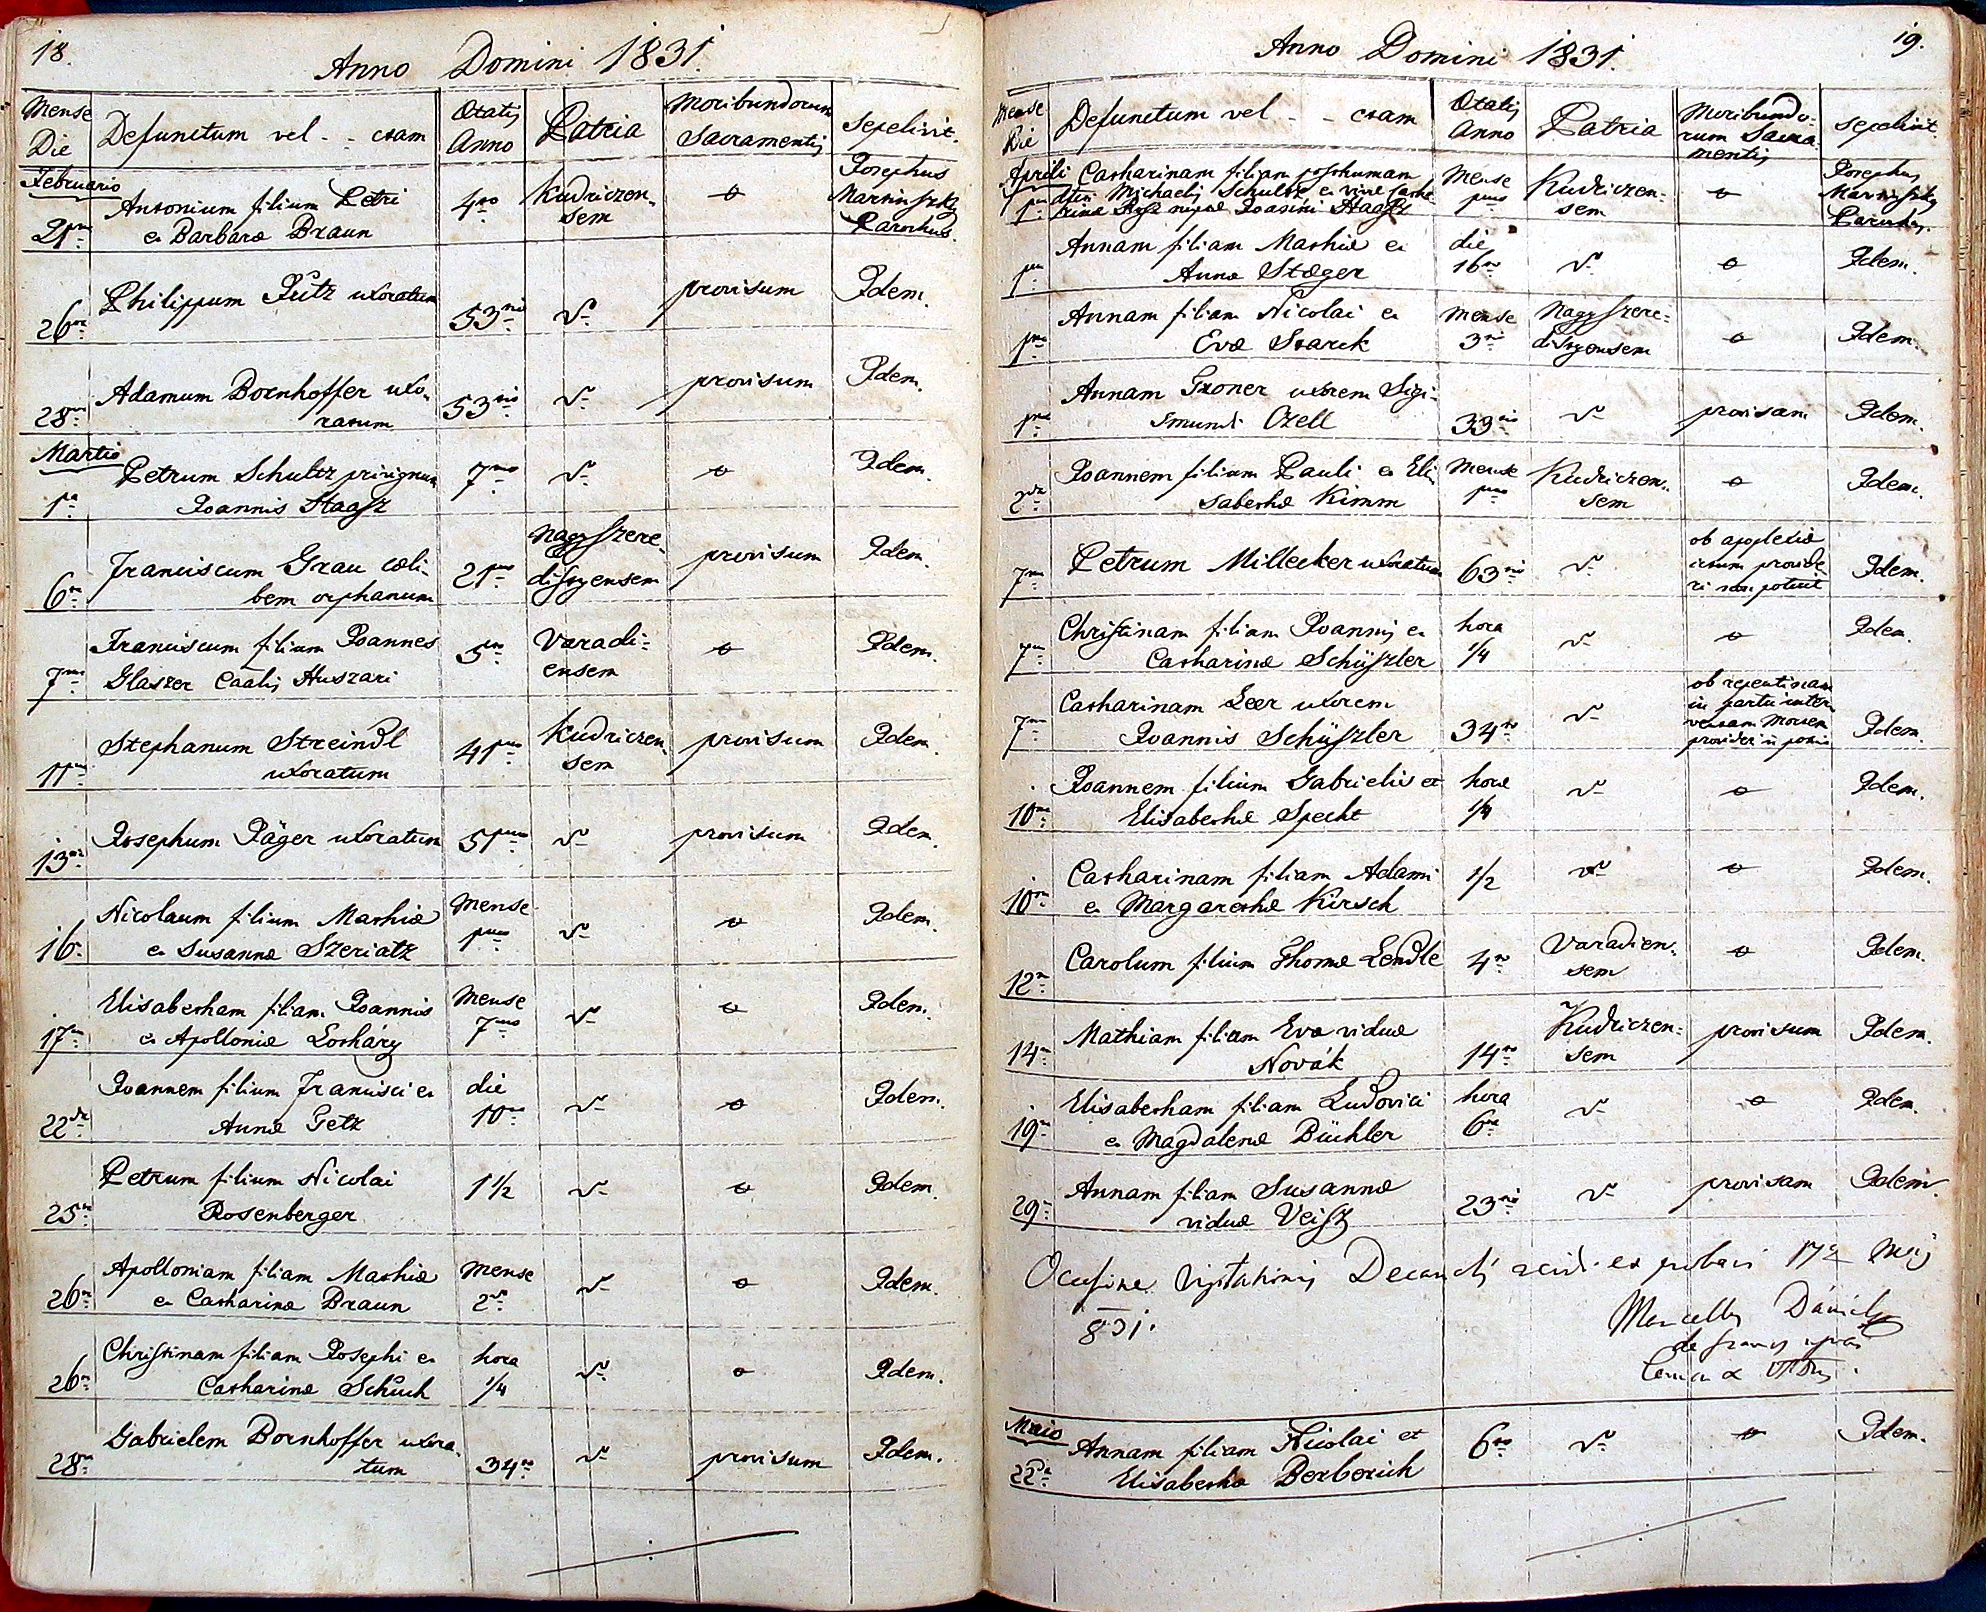 images/church_records/DEATHS/1742-1775D/018 i 019